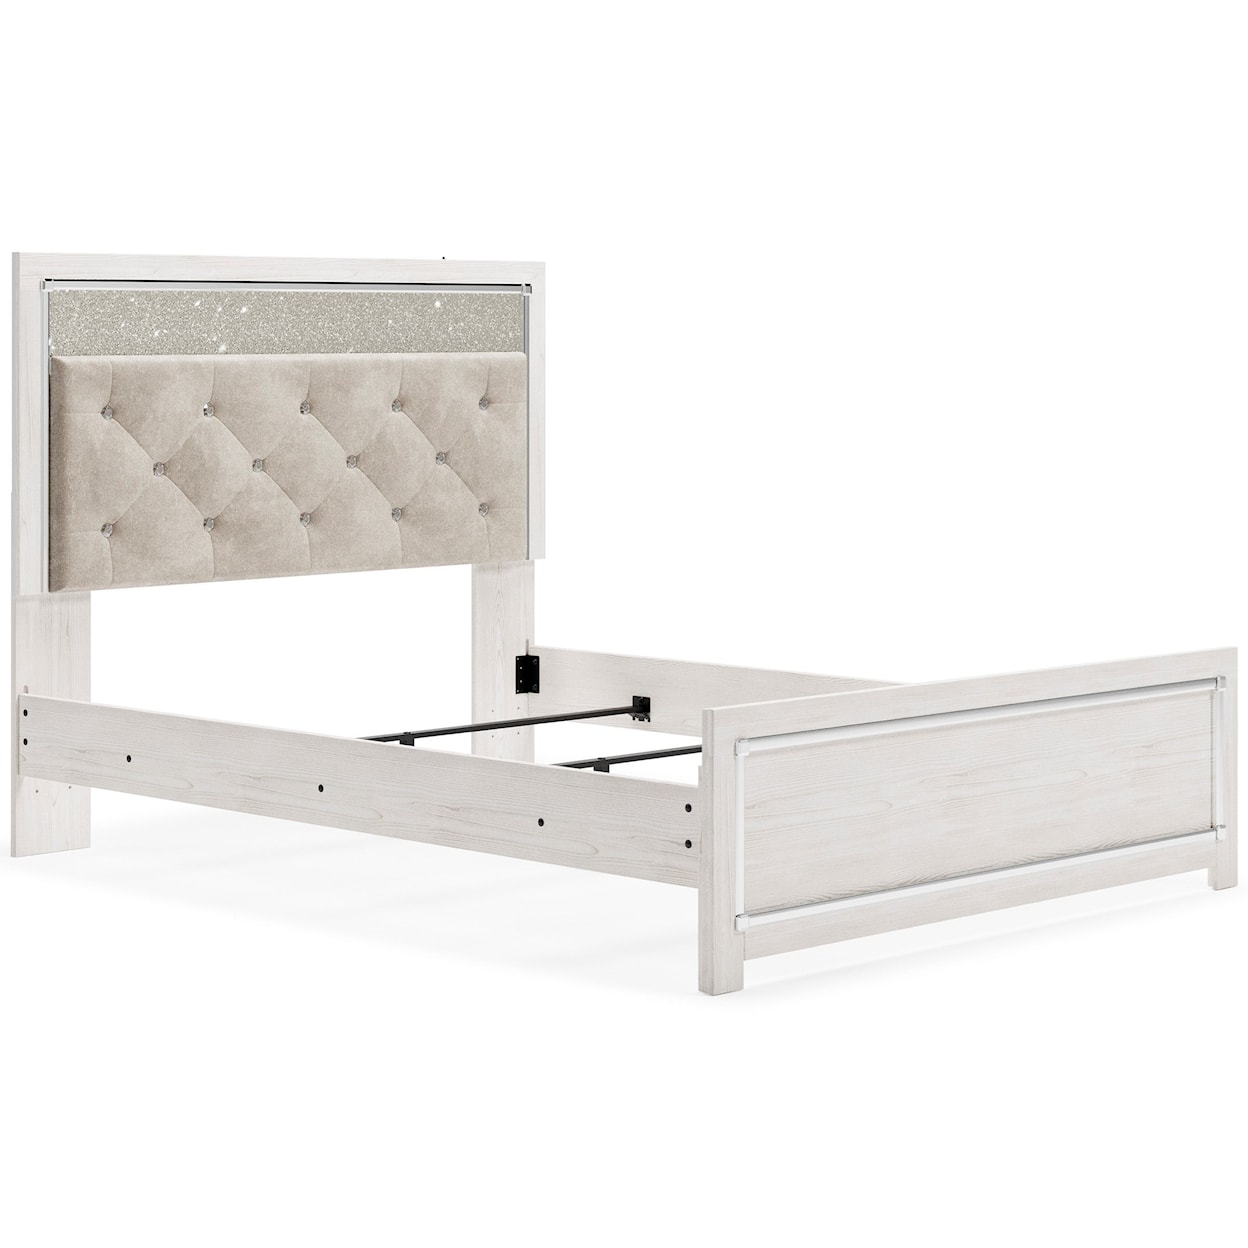 Signature Design by Ashley Altyra Queen Panel Bed